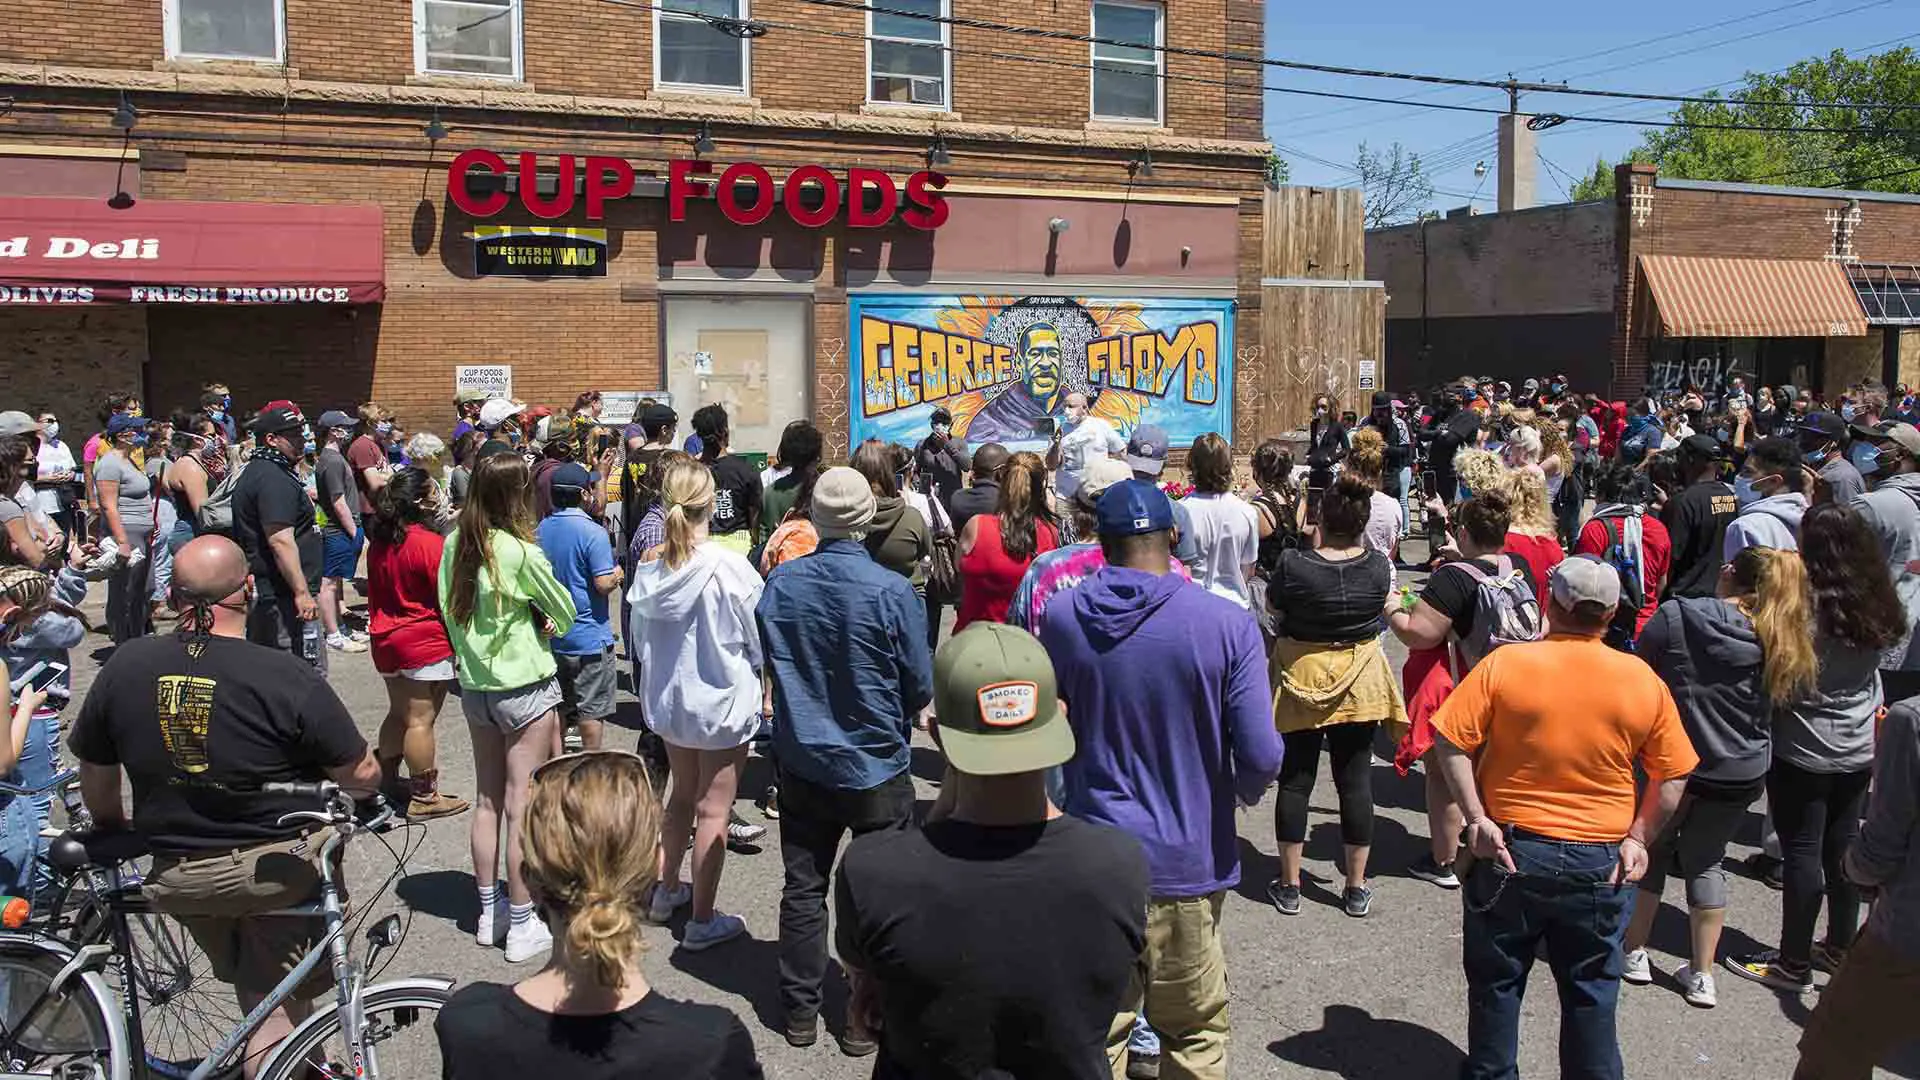 A rally at the spot in Minneapolis, Minn., where George Floyd was killed in May 2020, which sparked widespread protests and discussions on race, police brutality and policing reform. 